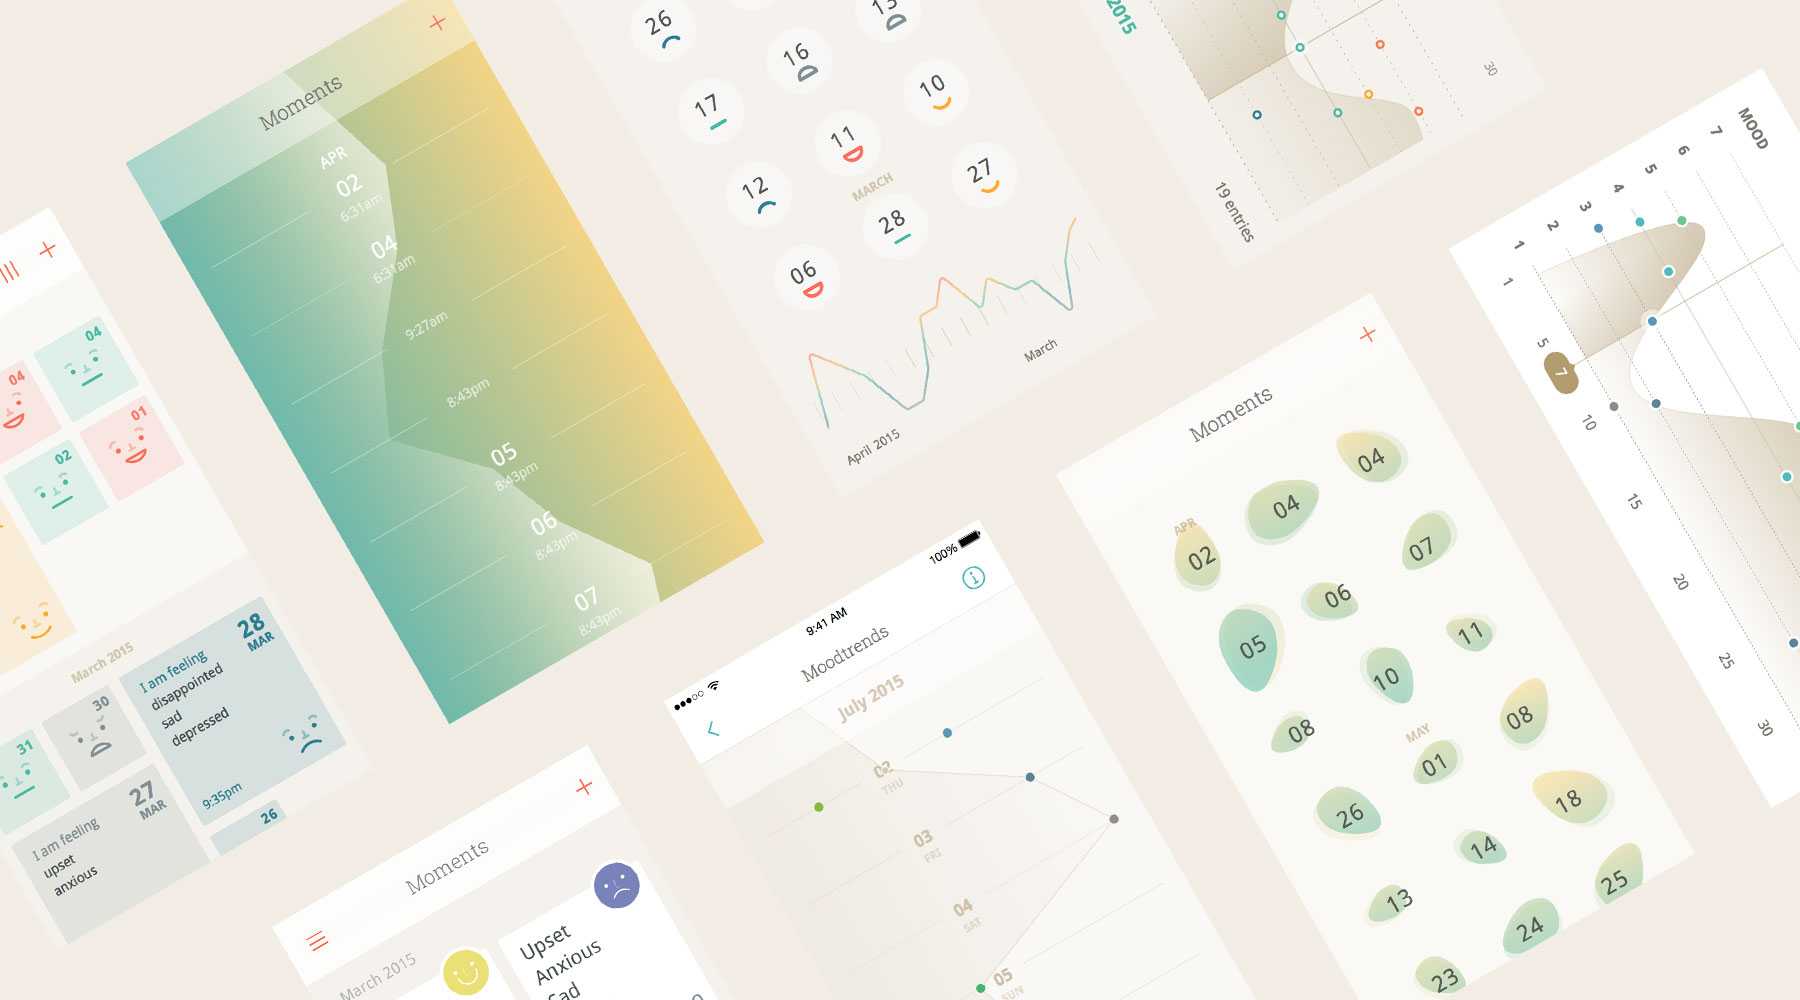 Design concepts for phone app